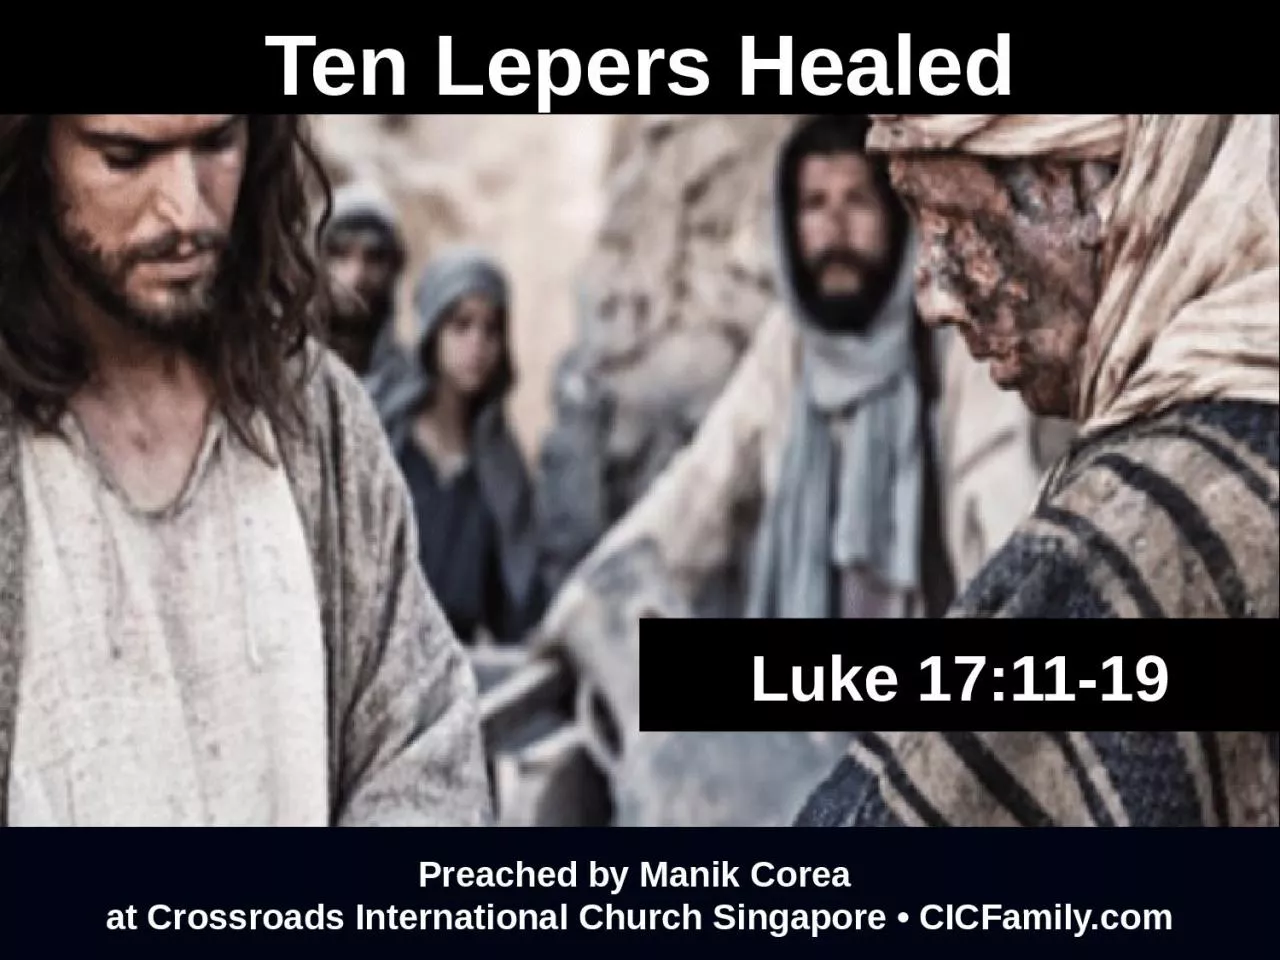 Ten Lepers Healed Preached by Manik Corea